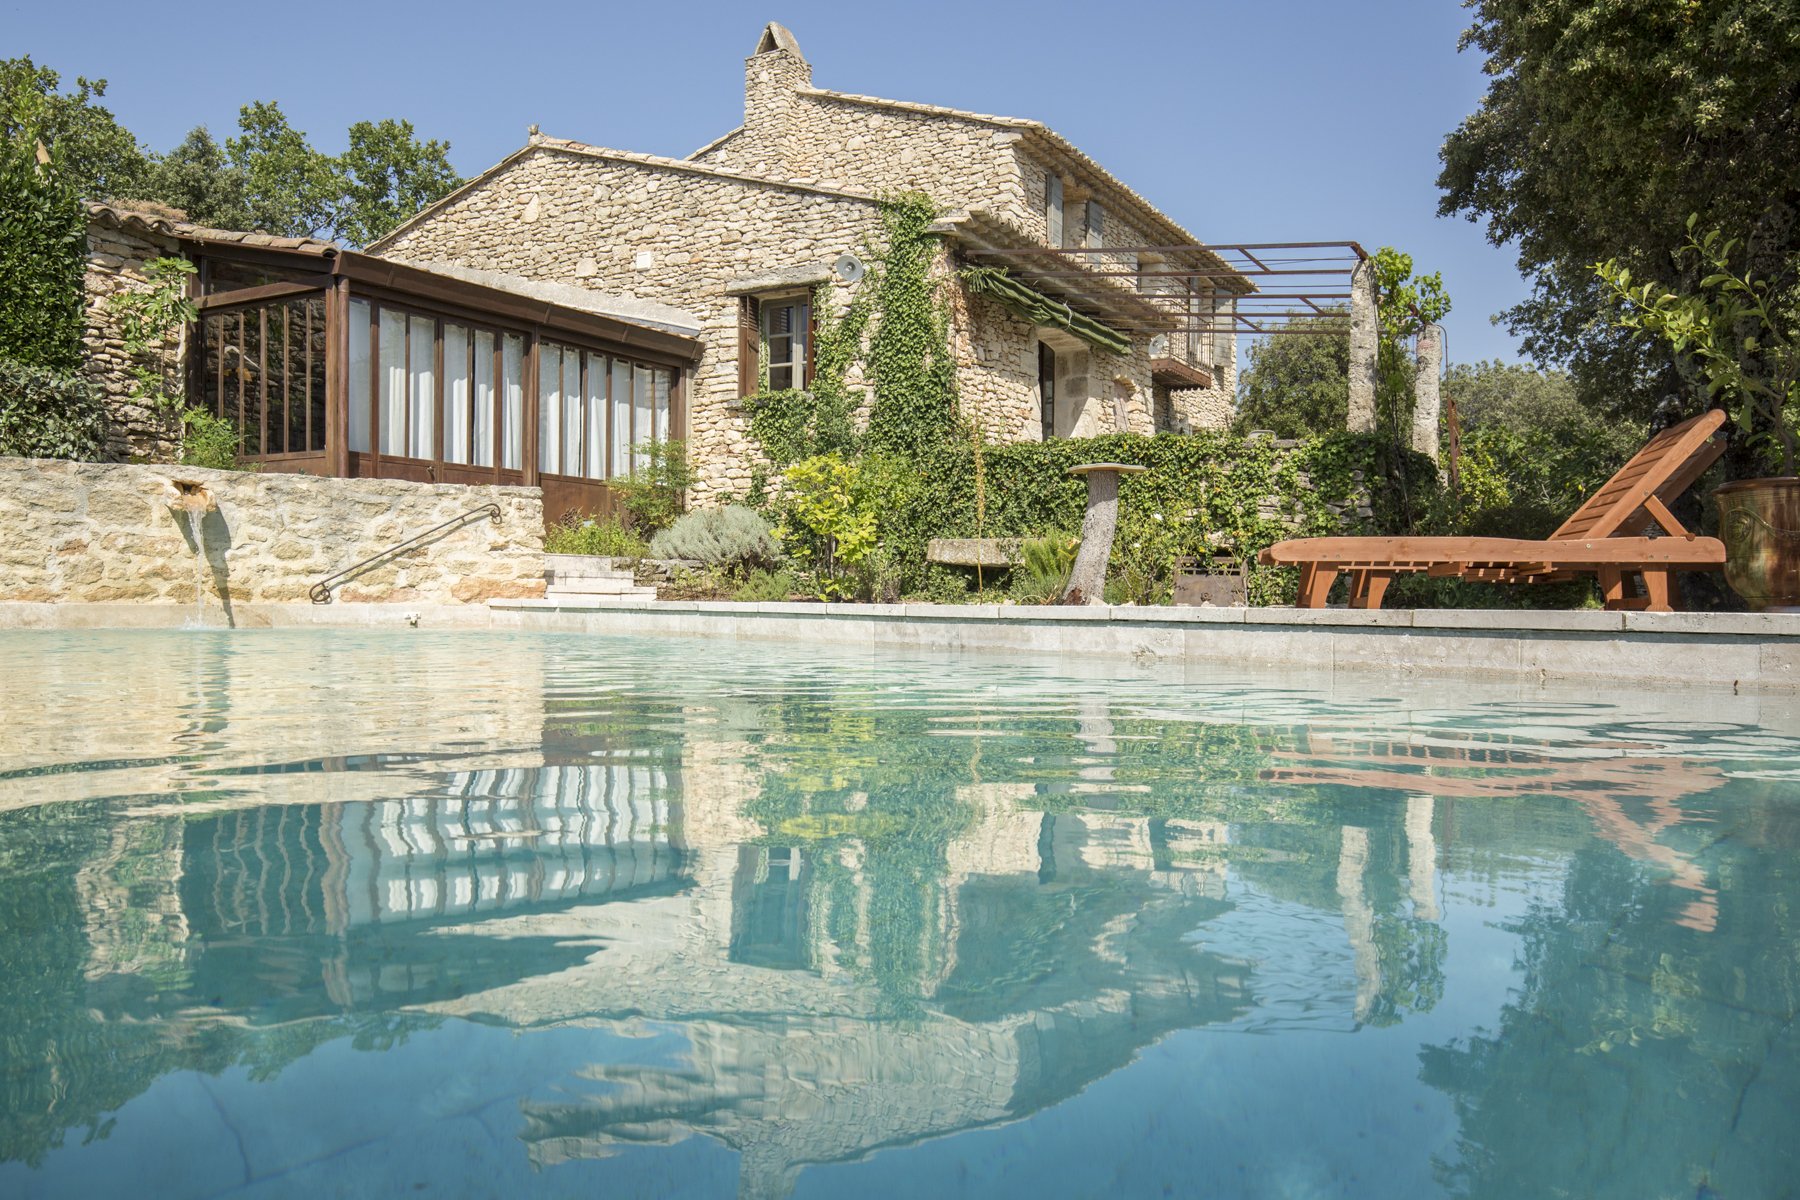 Francis York  Charming Stone House in the Provencal Village of Gordes, France  00011.jpg